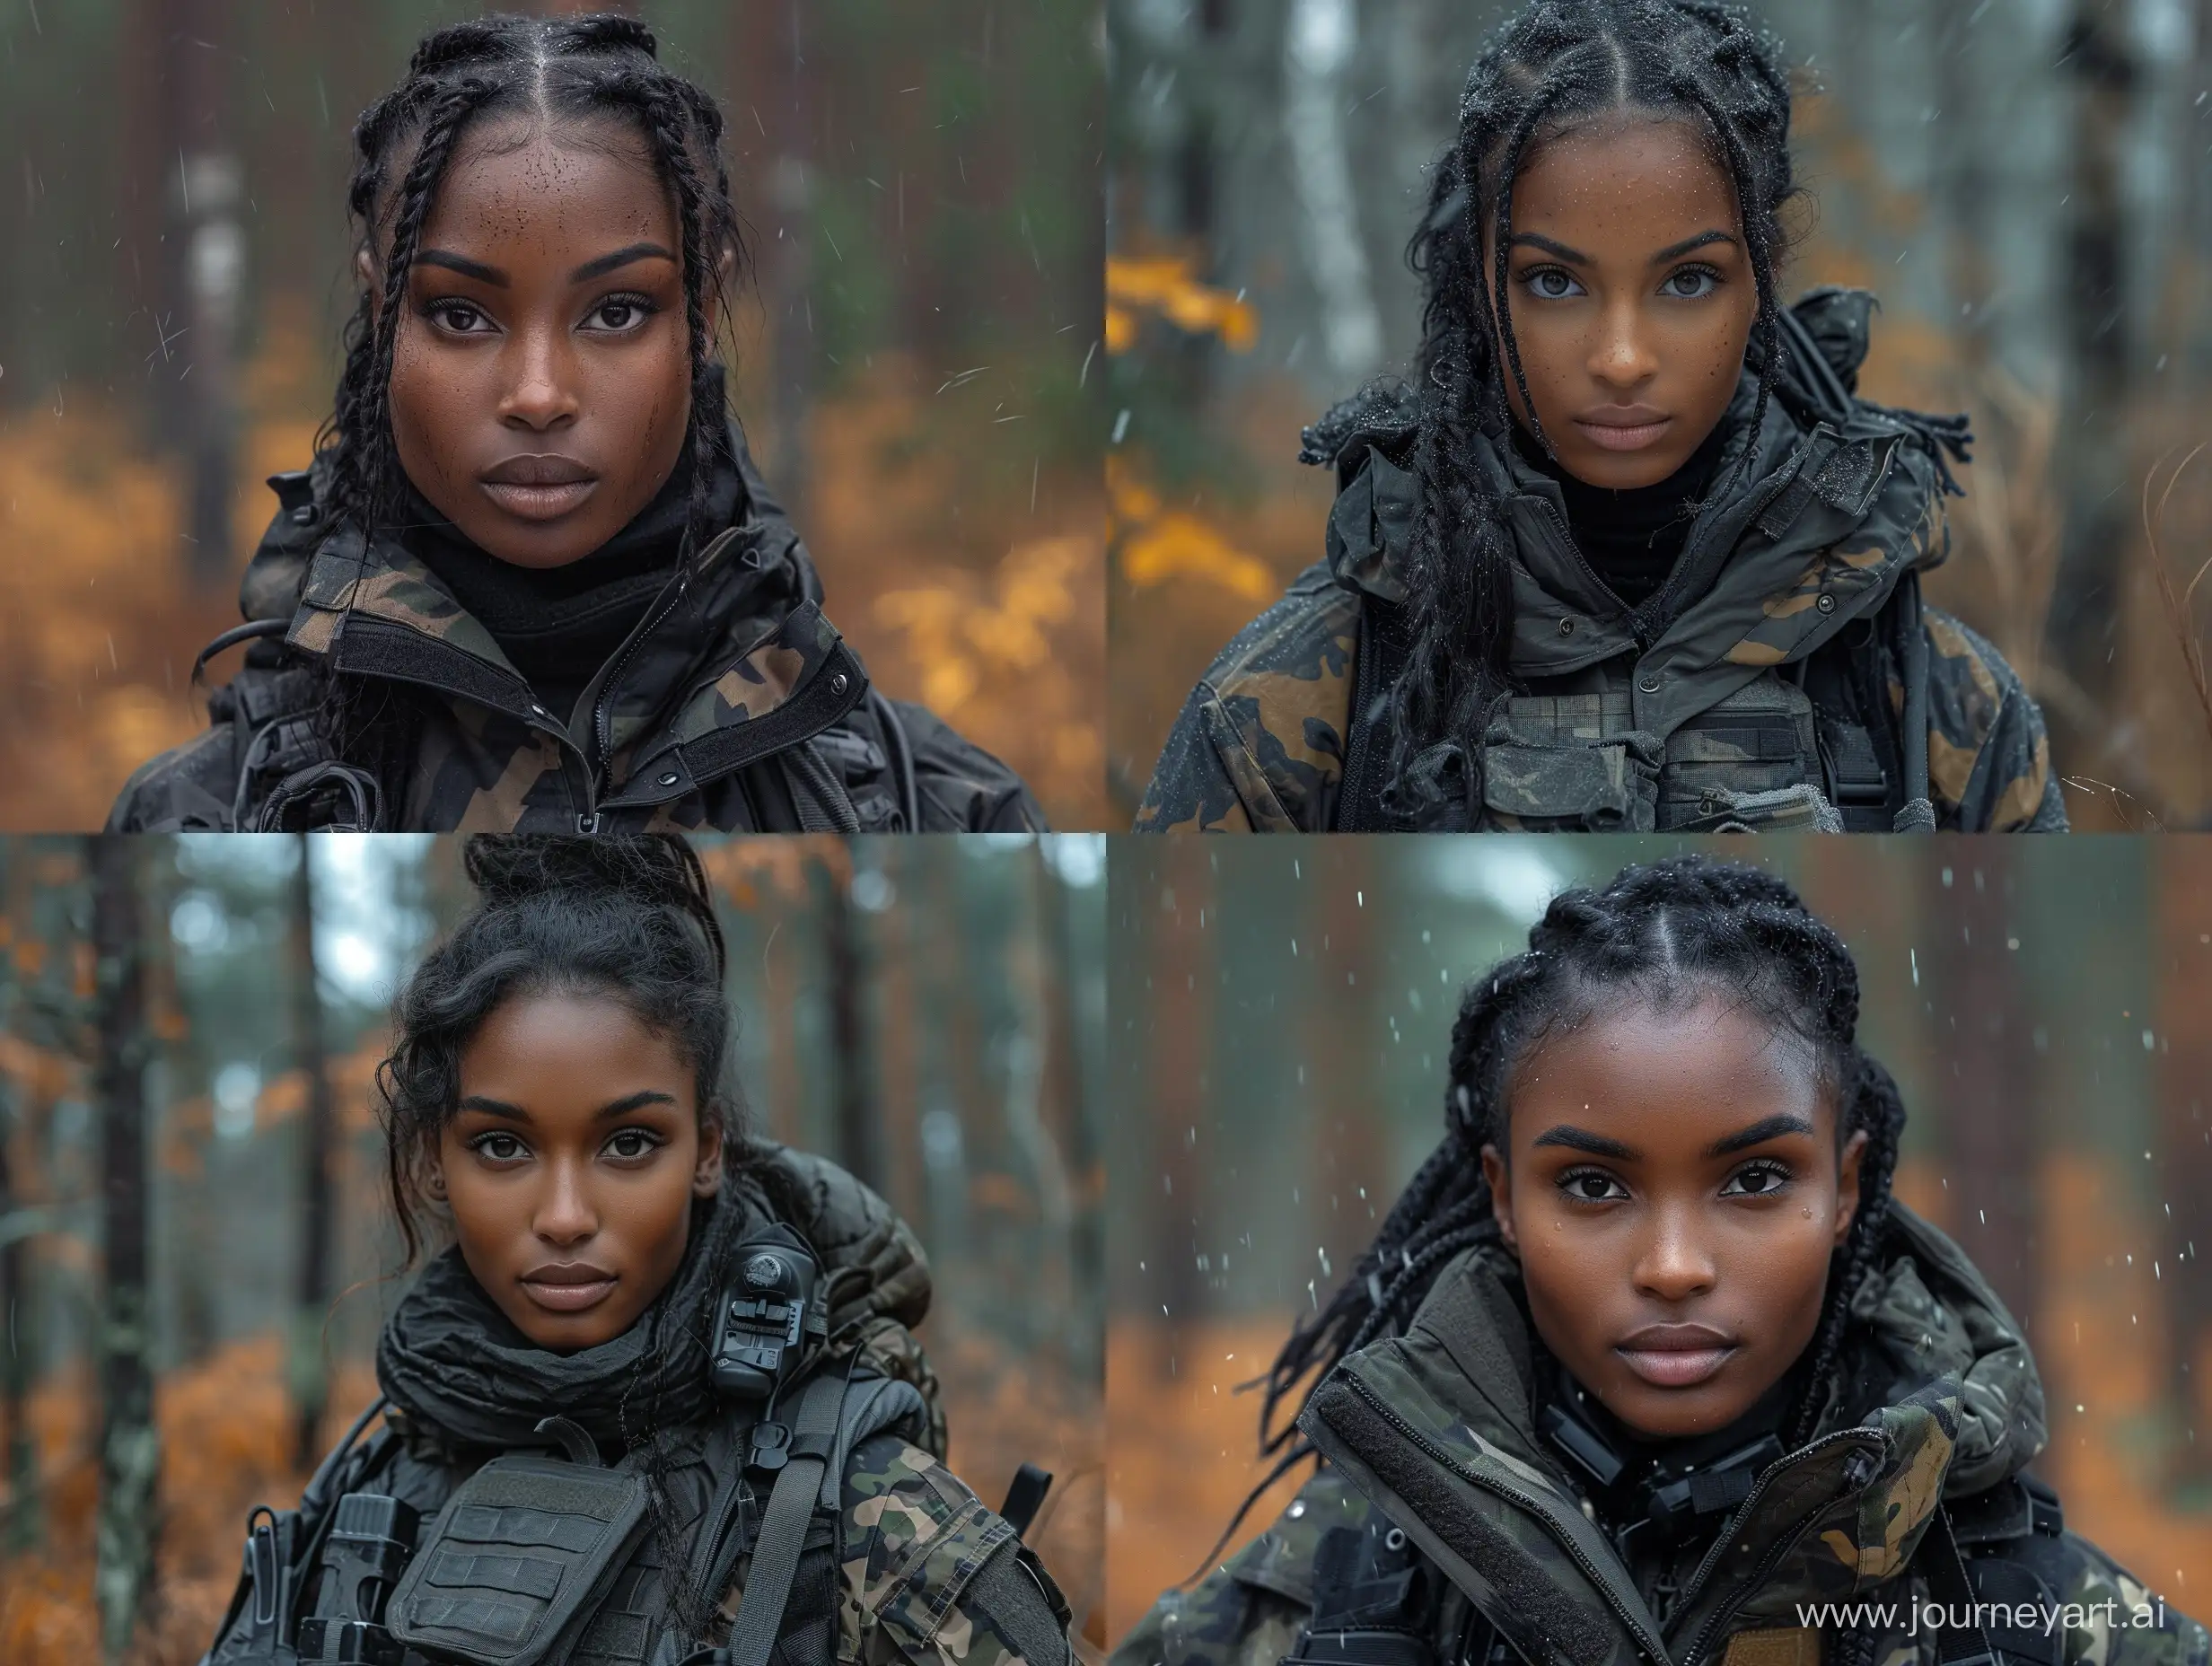 Camouflage-Female-Mercenary-in-Dark-Forest-with-Tactical-Equipment